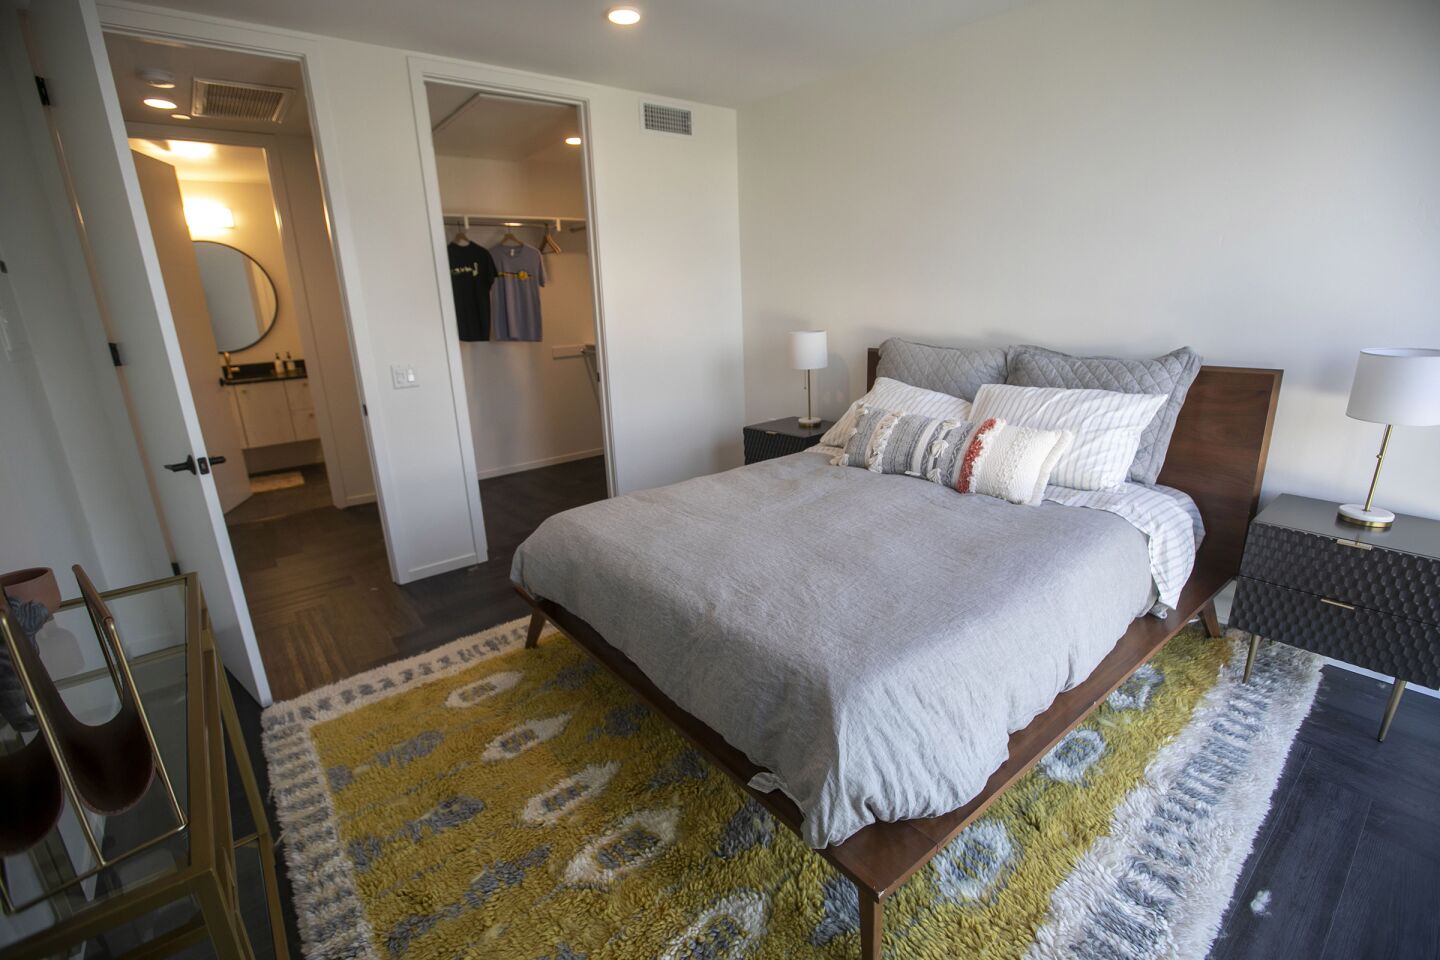 One of the bedrooms in a two bedroom unit of the Collins luxury apartment complex on La Jolla Blvd. on Tuesday, January 14, 2020.